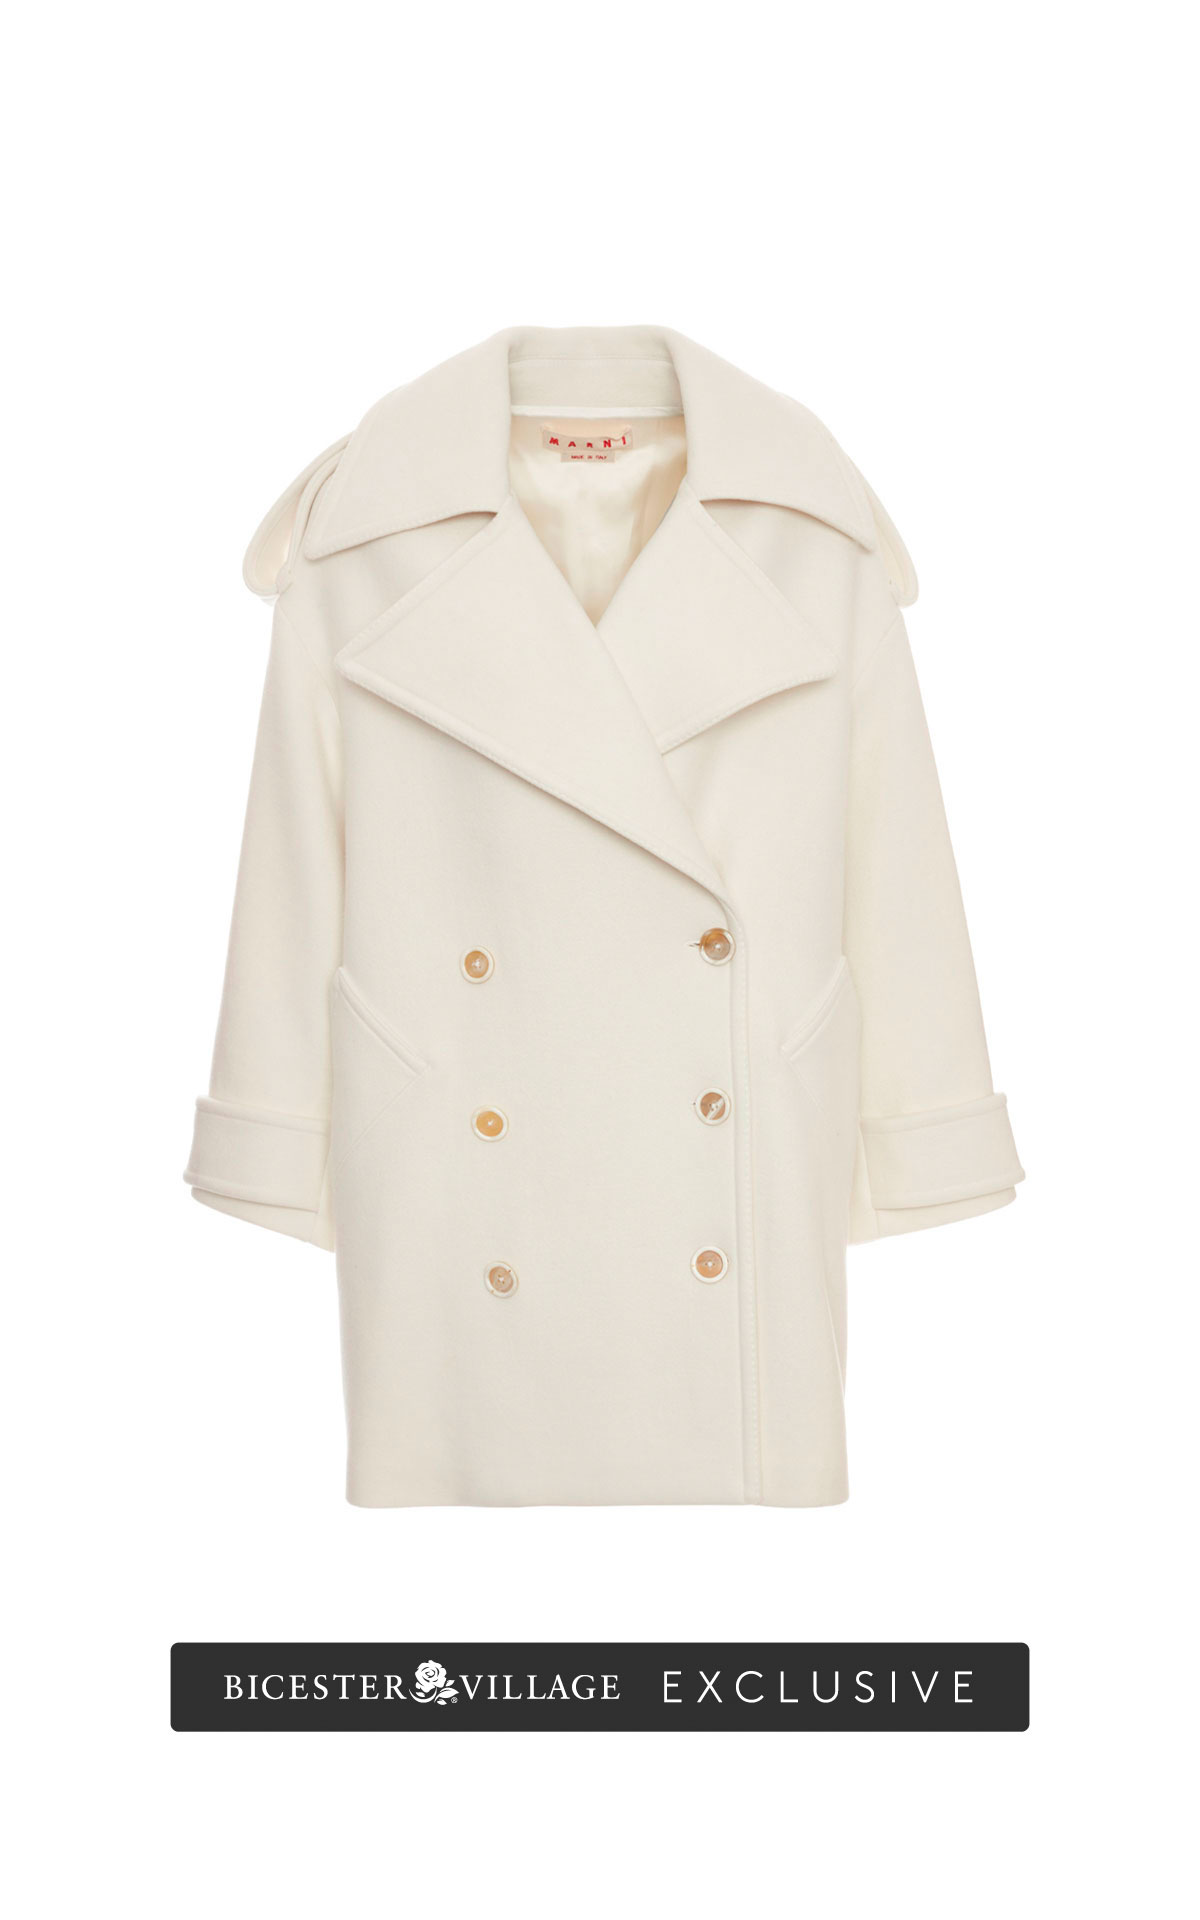 Marni Oversized white wool coat from Bicester Village